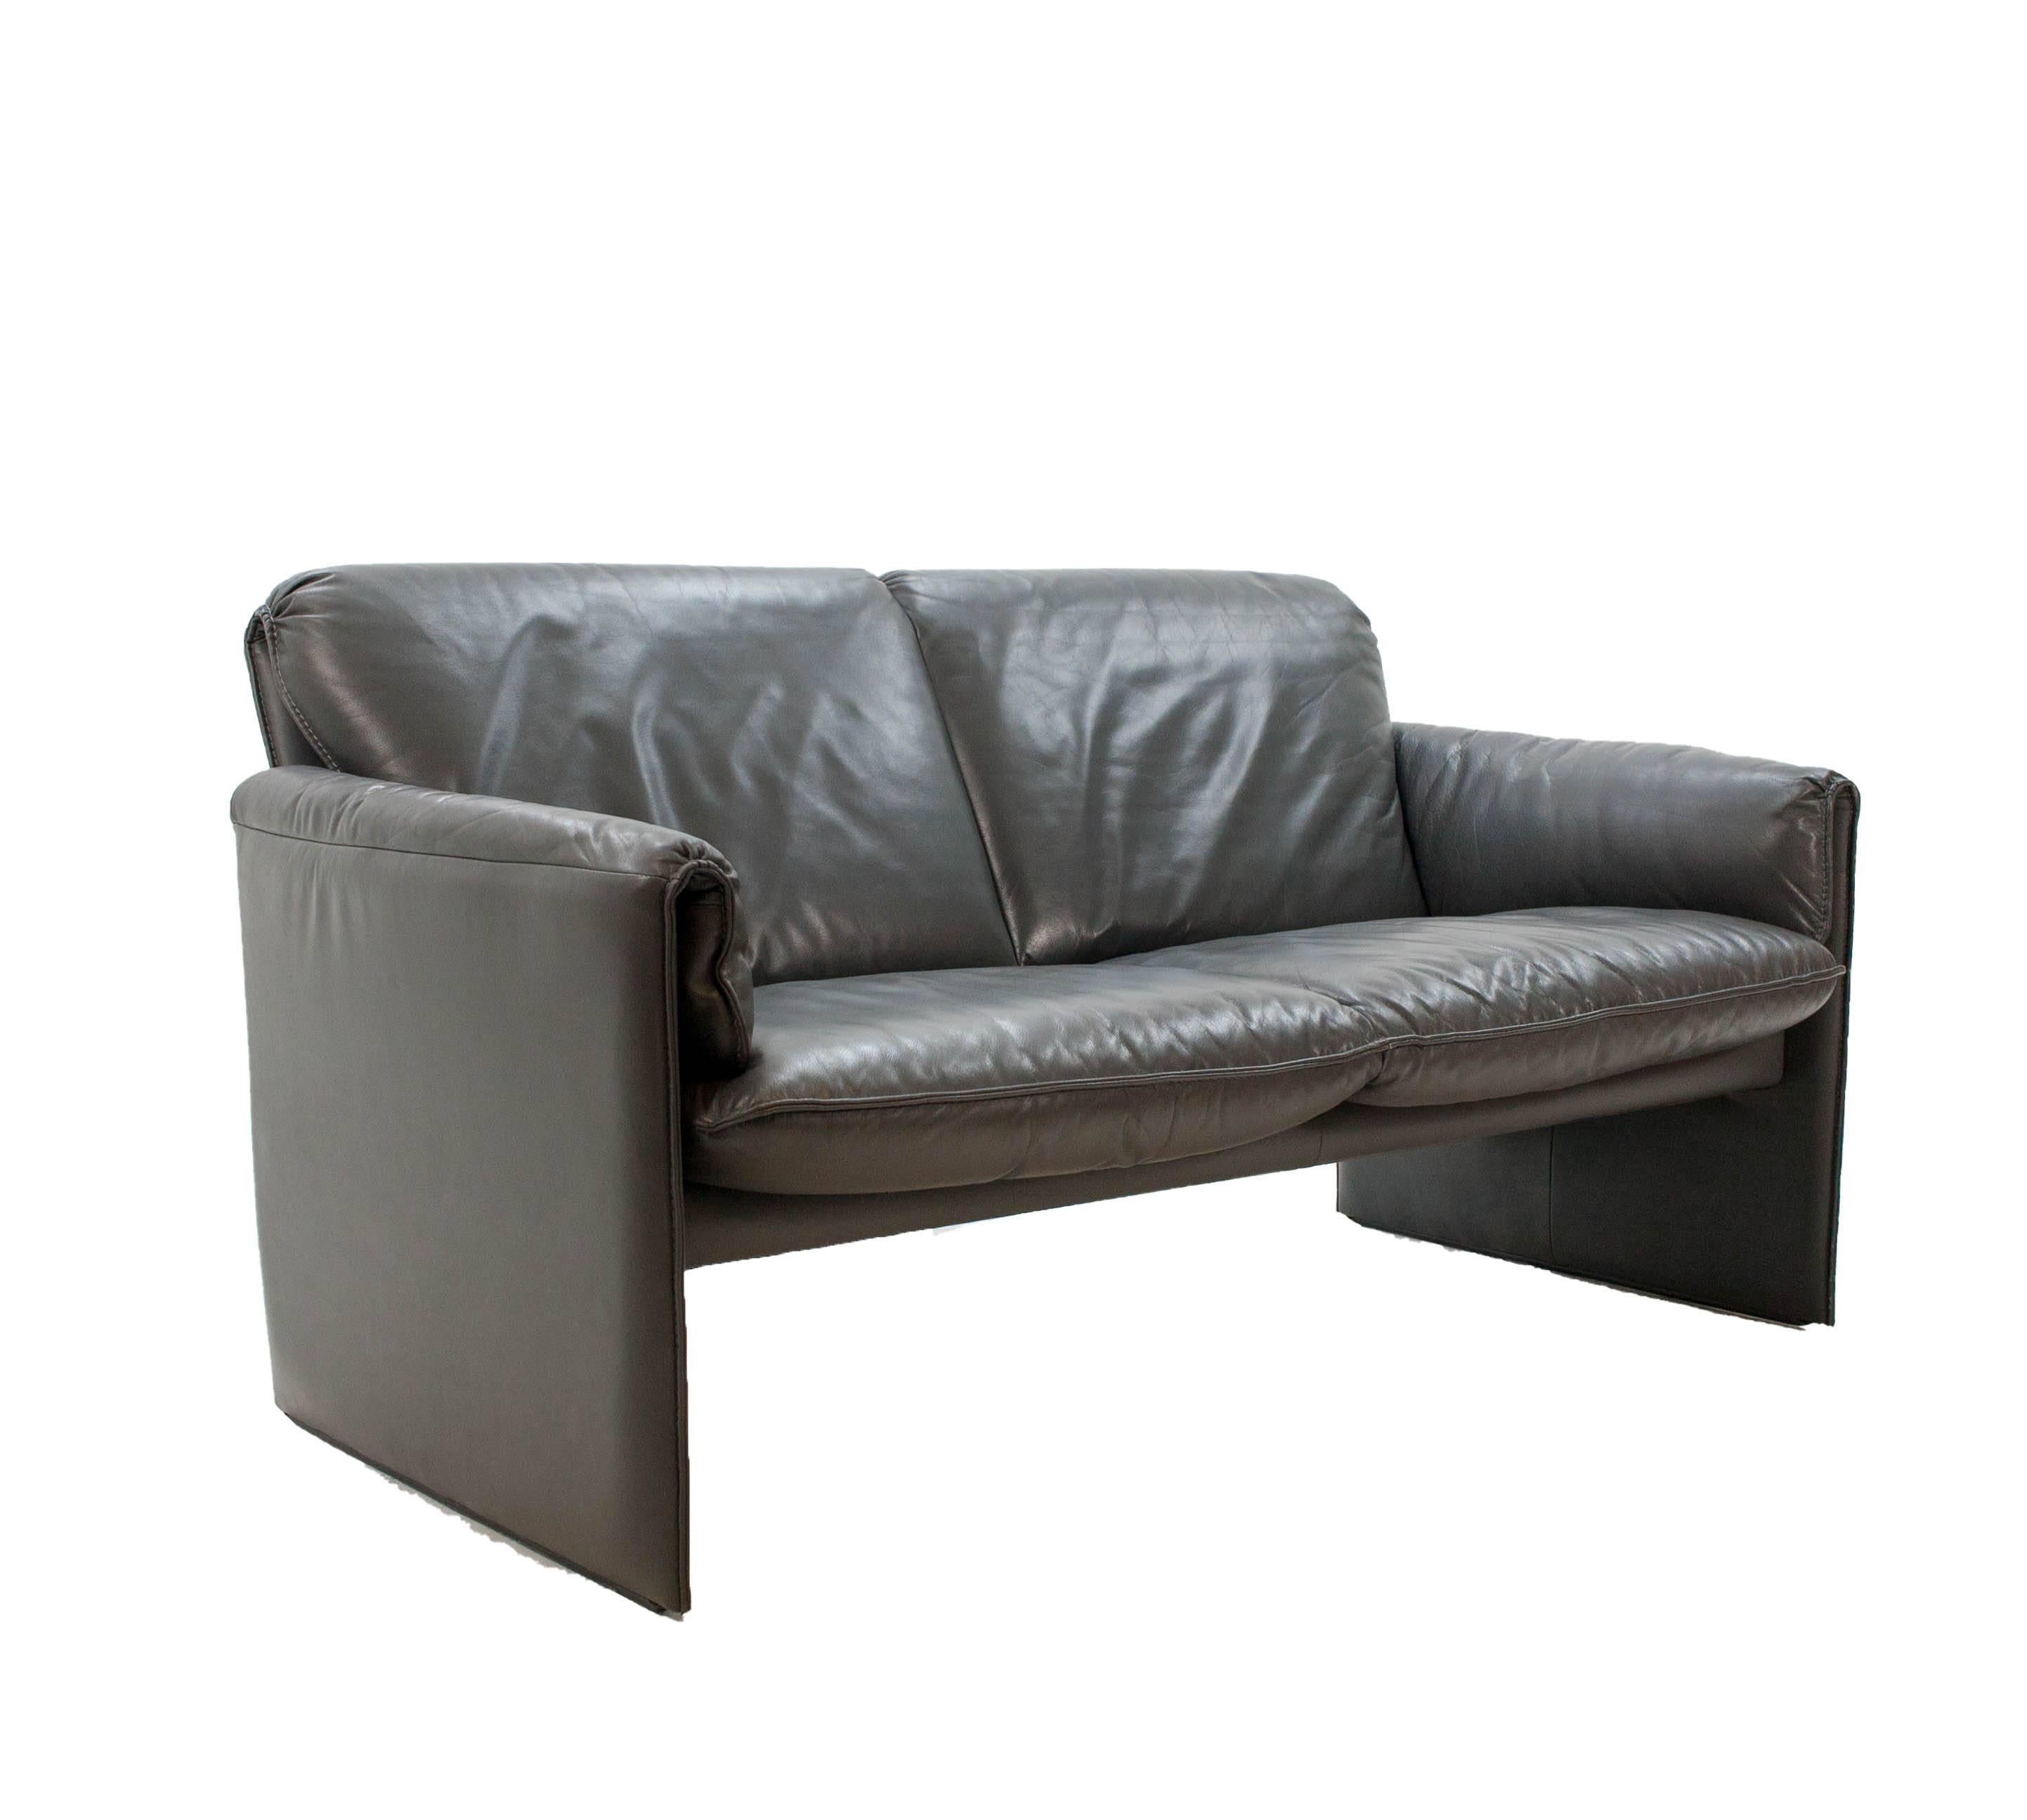 Airy and subtle loveseat in anthracite leather with white contrast stitching. These sofas have been in production for 35 years straight and are still favorites due to their great comfort and good understated design.